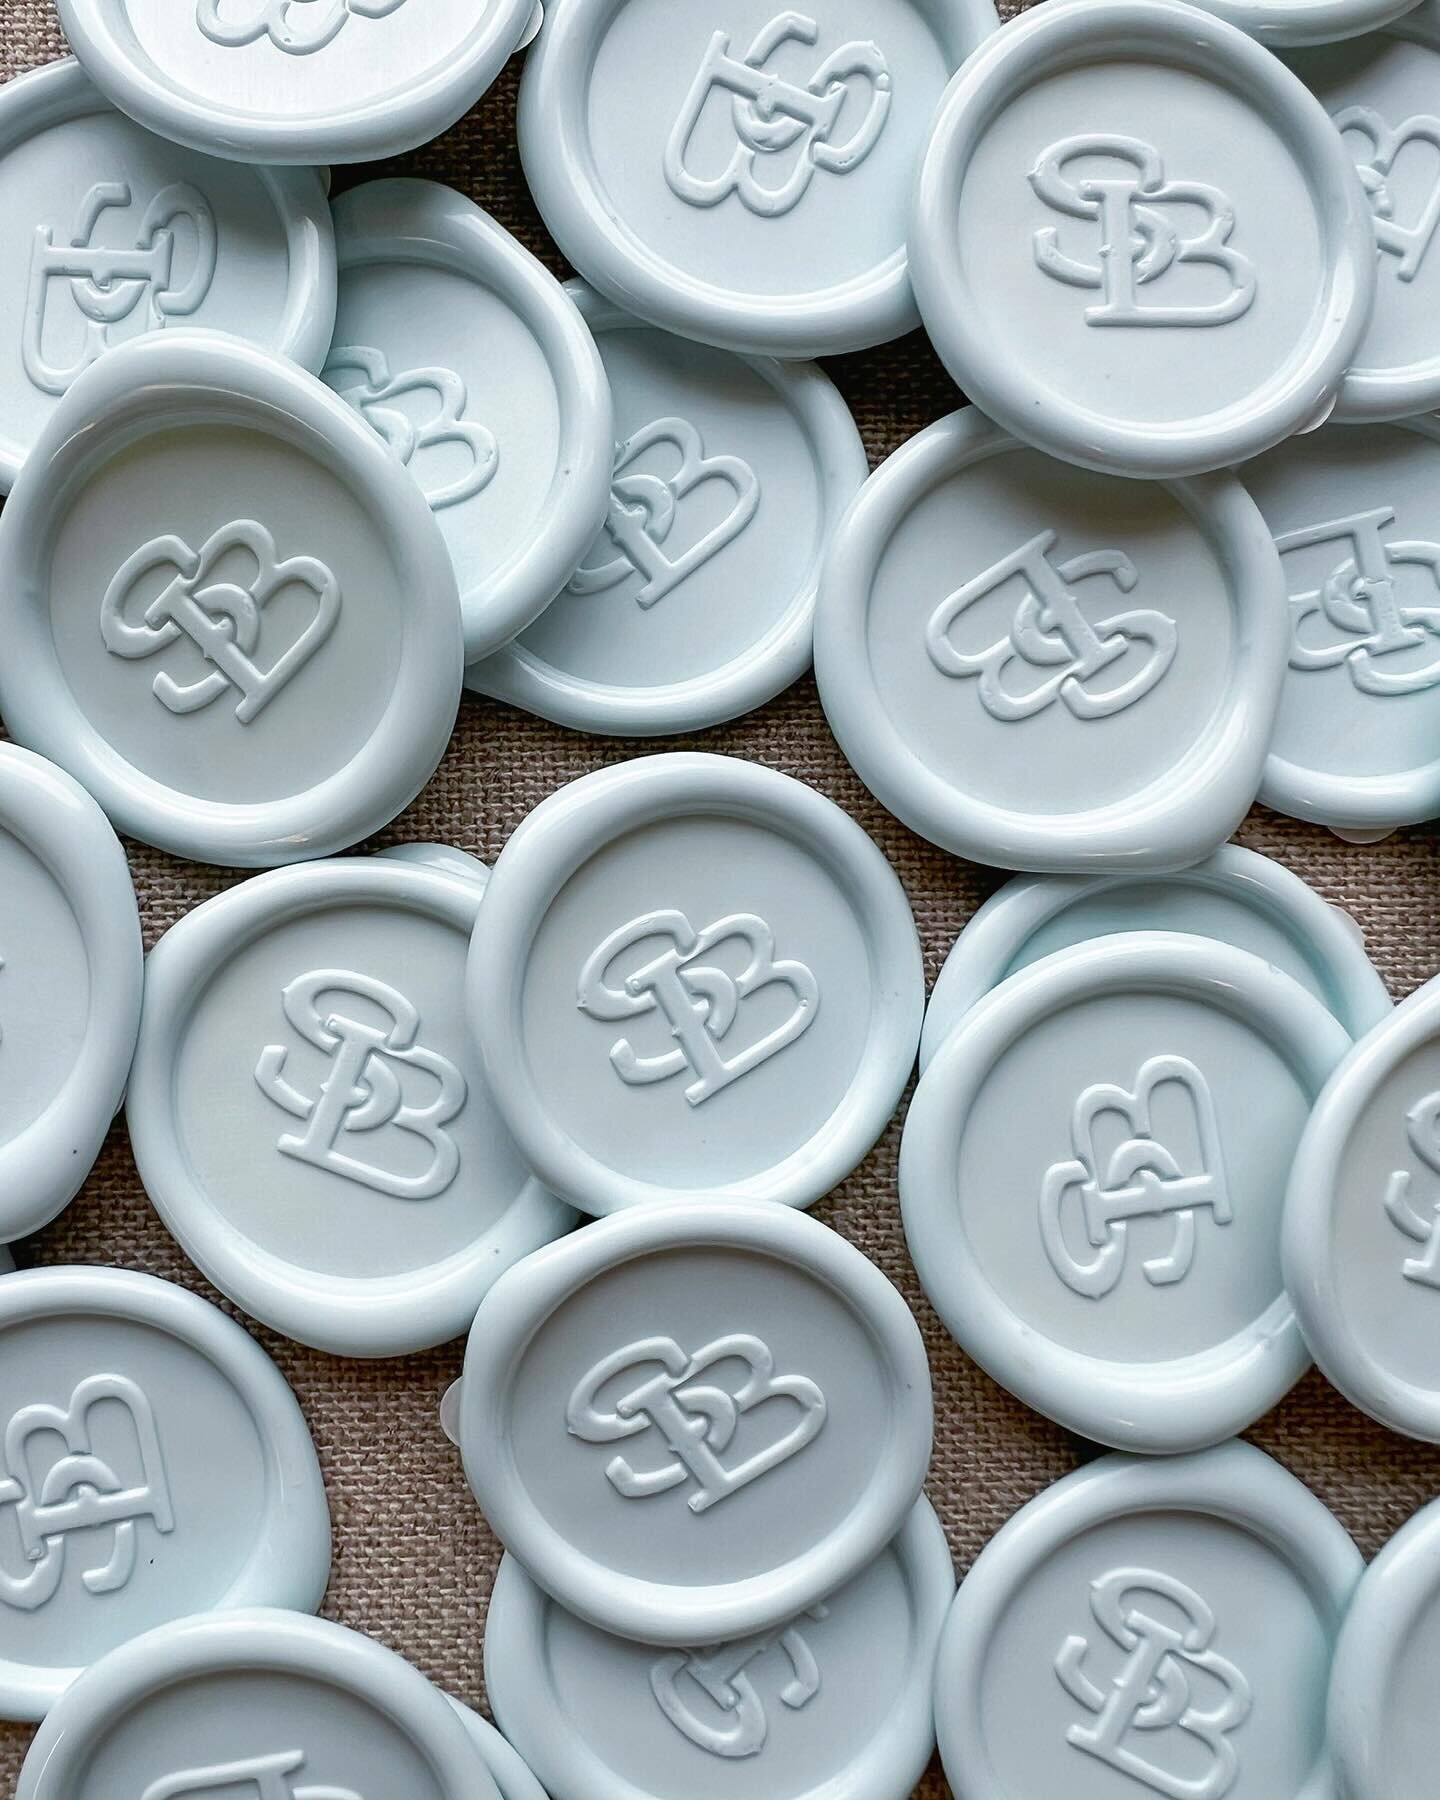 A moment for these wax seals 🤩🩵
#paperandposte #waxseal #wedding #invitations #custom #stationery #monogram